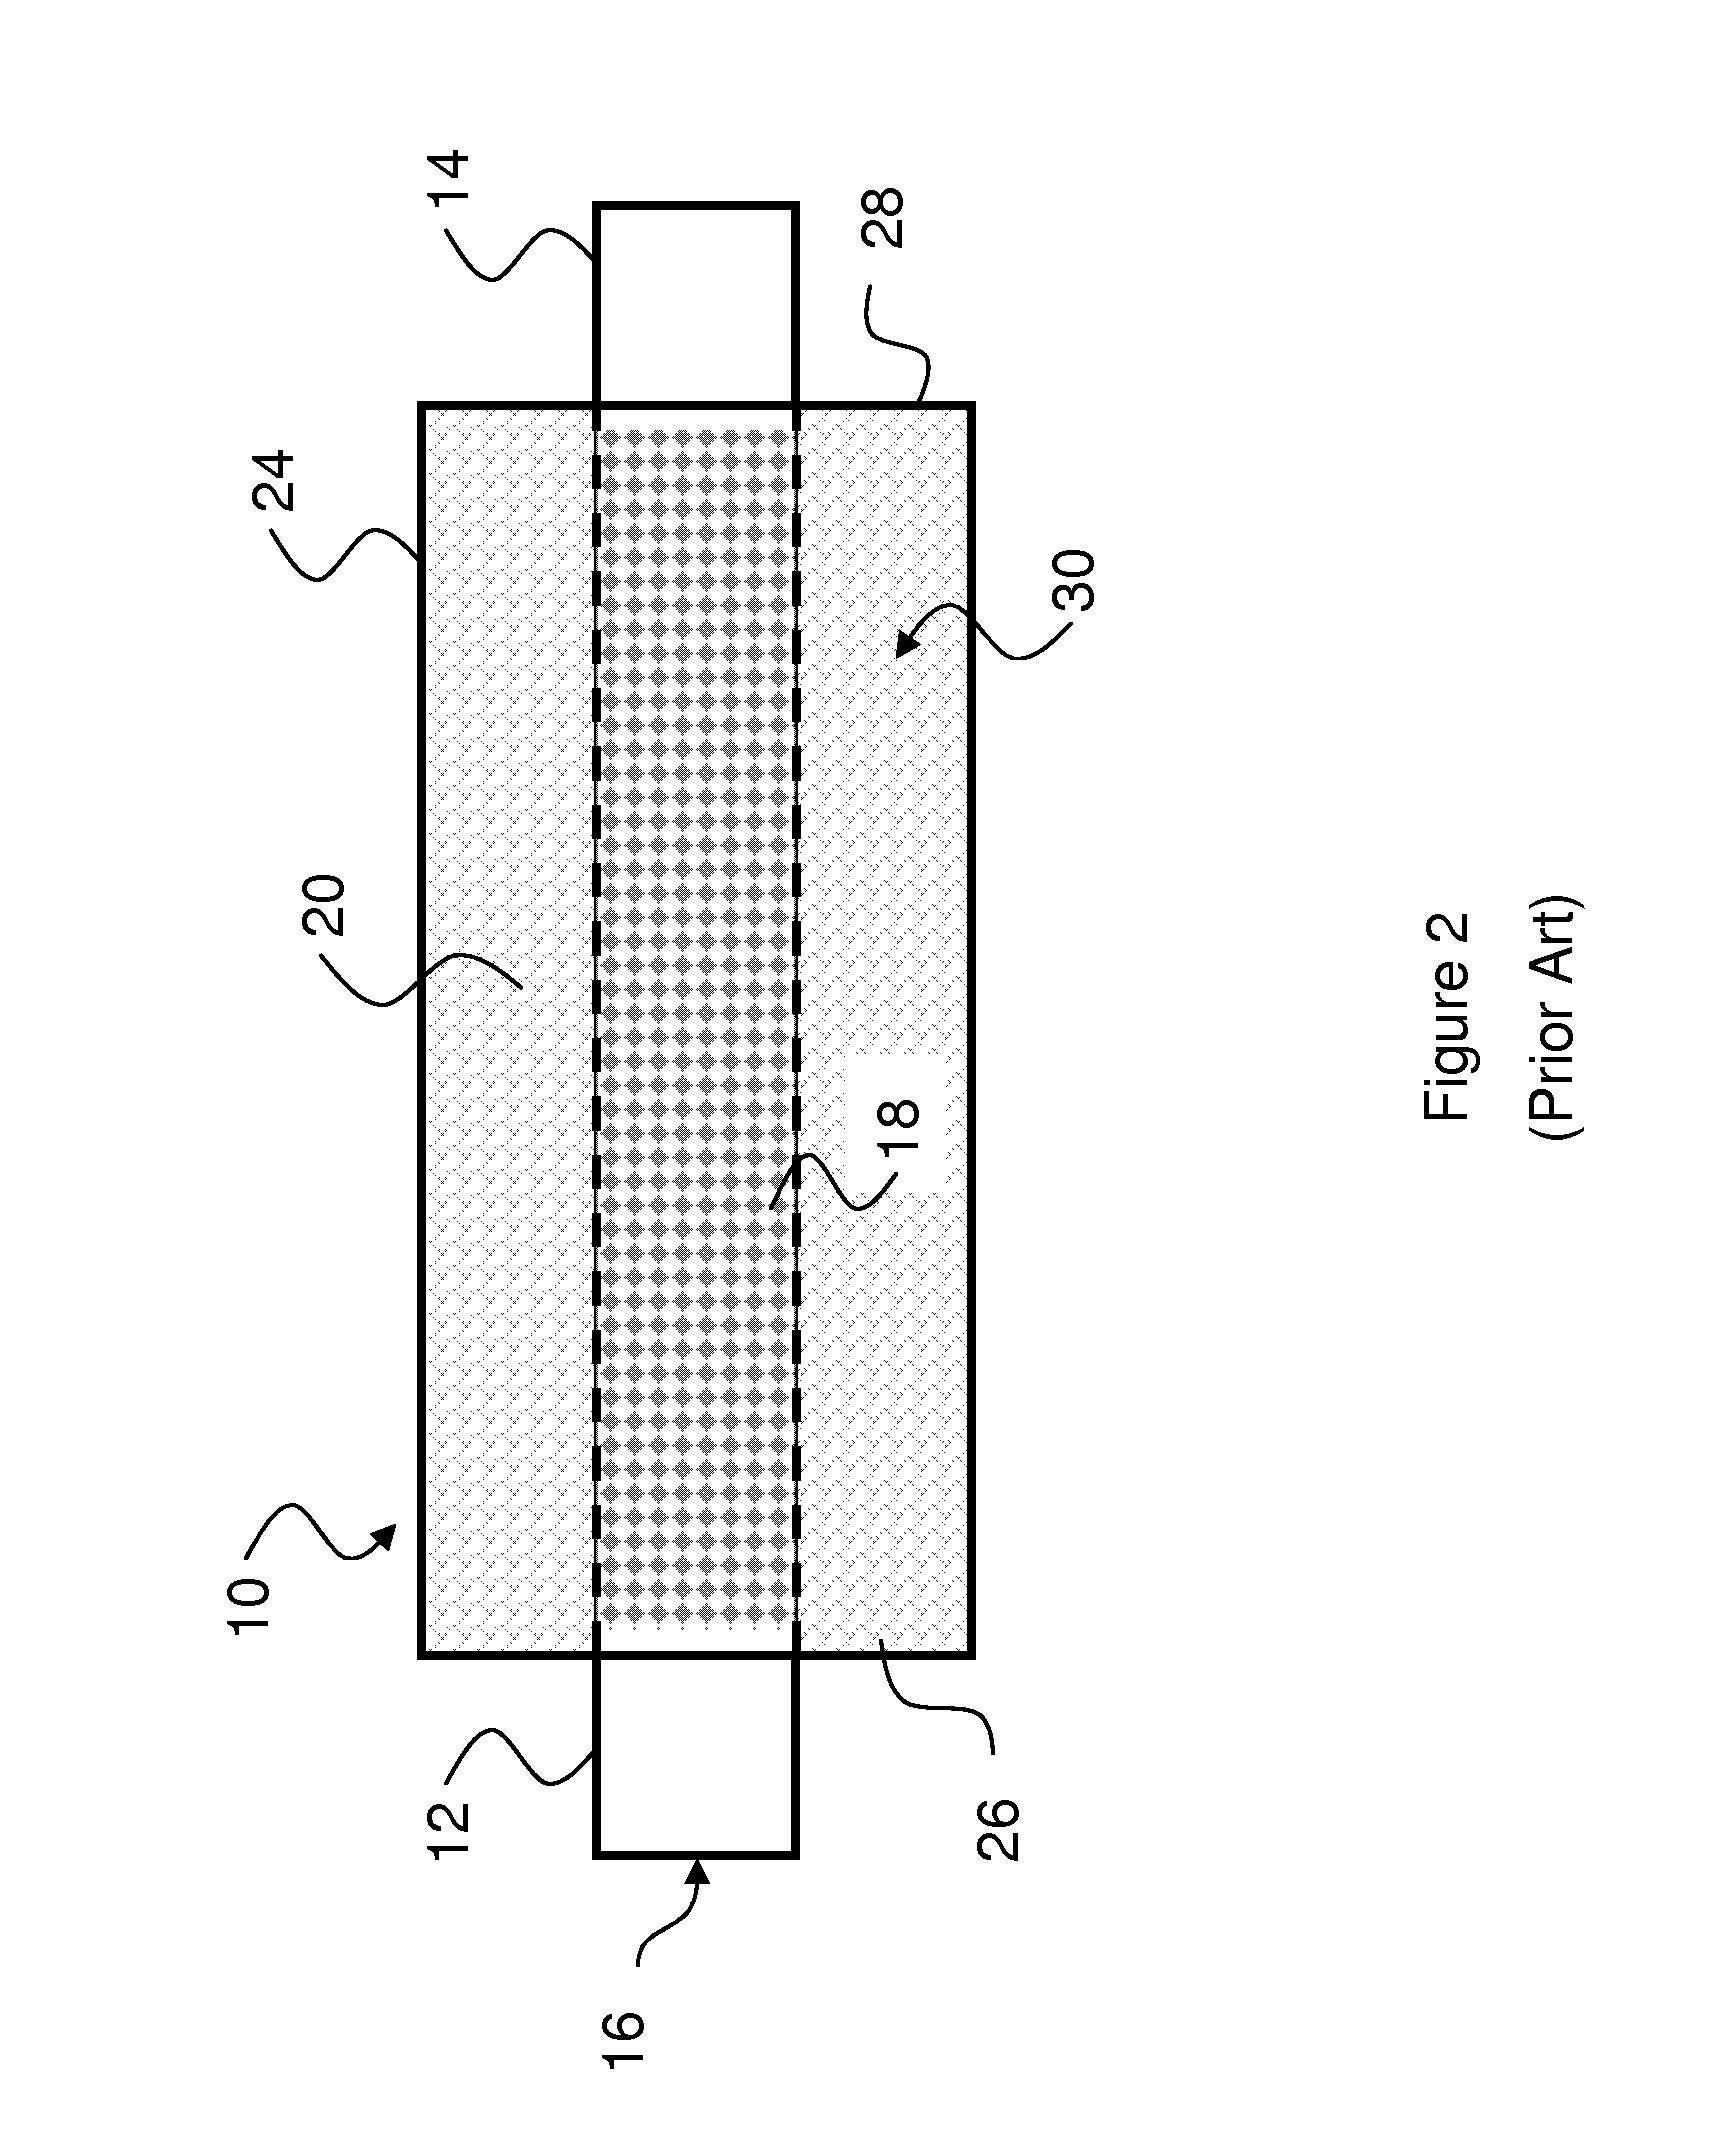 Exhaust sound attenuation device and method of use